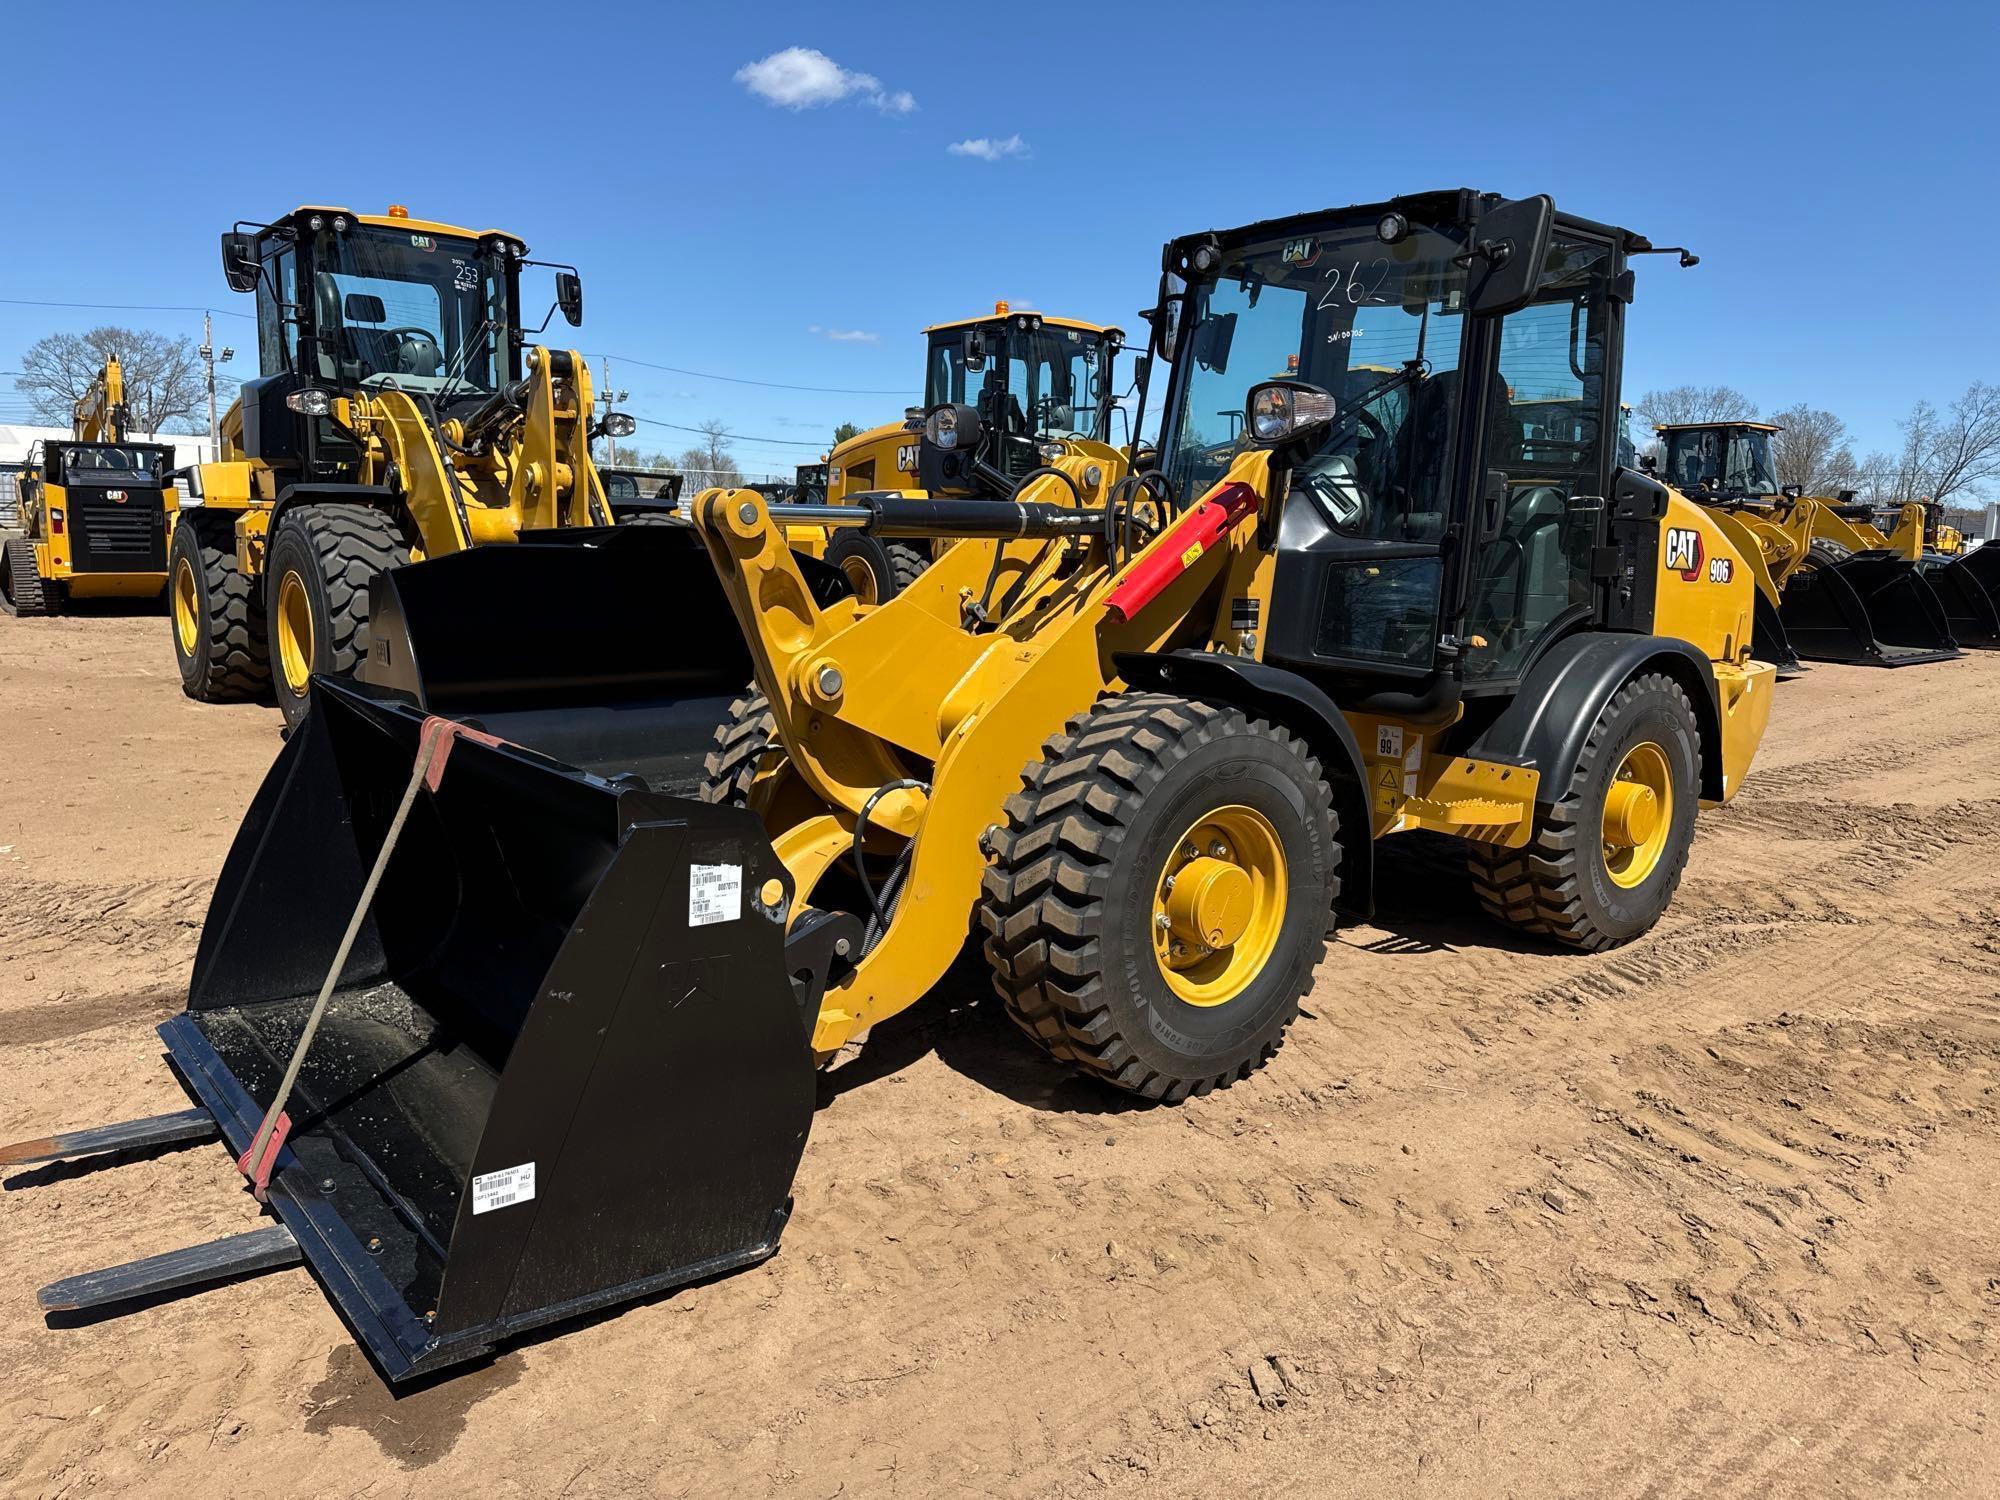 NEW UNUSED 2023 CAT 906 RUBBER TIRED LOADER SN-600705 powered by Cat C2.8 diesel engine, equipped